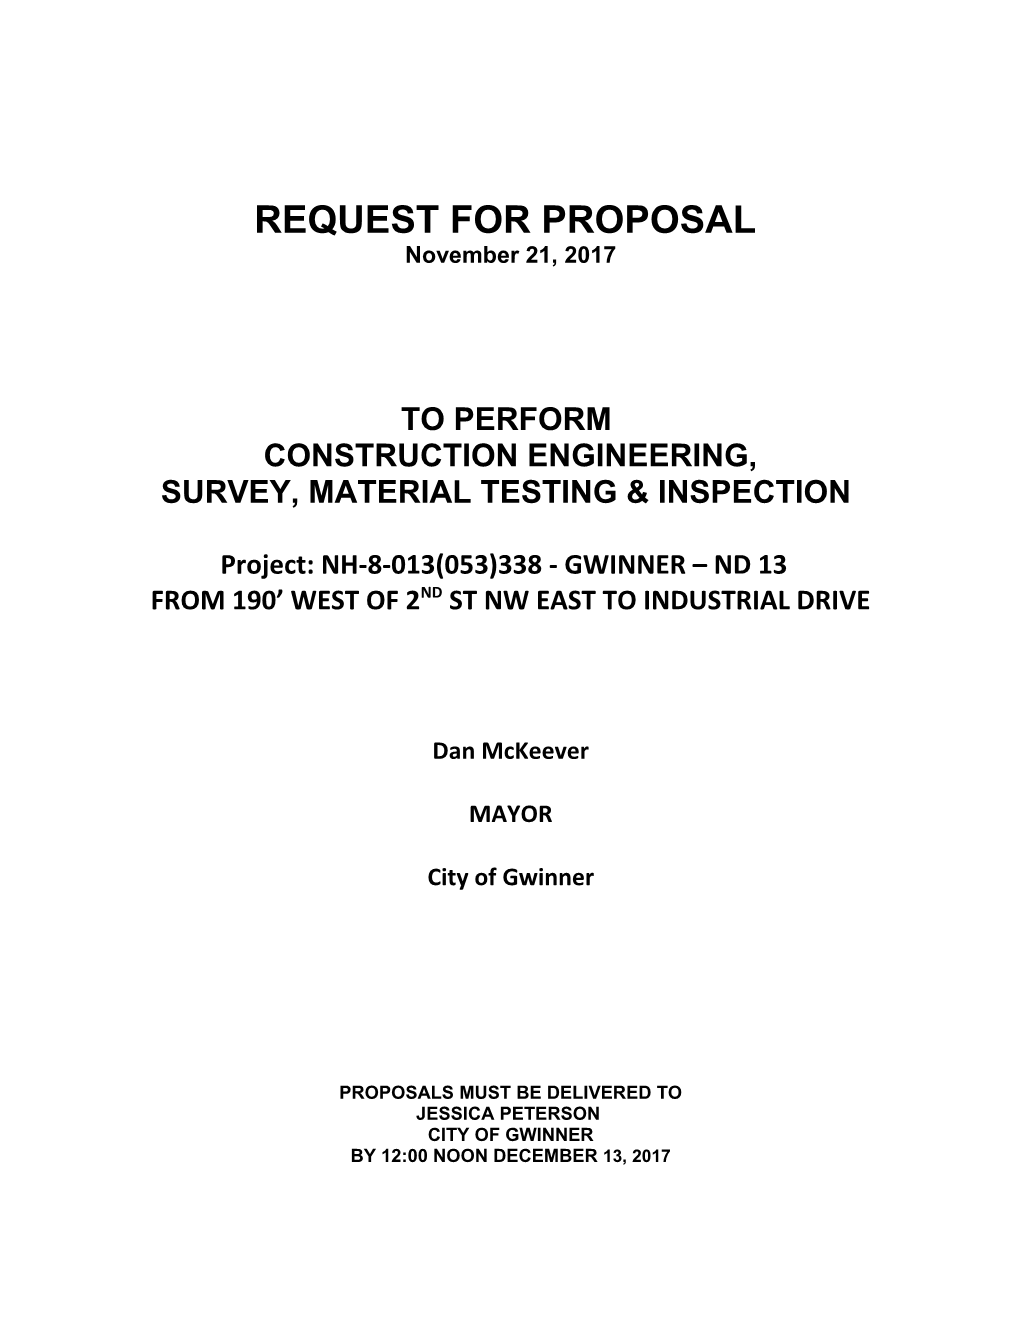 Request for Proposal s106